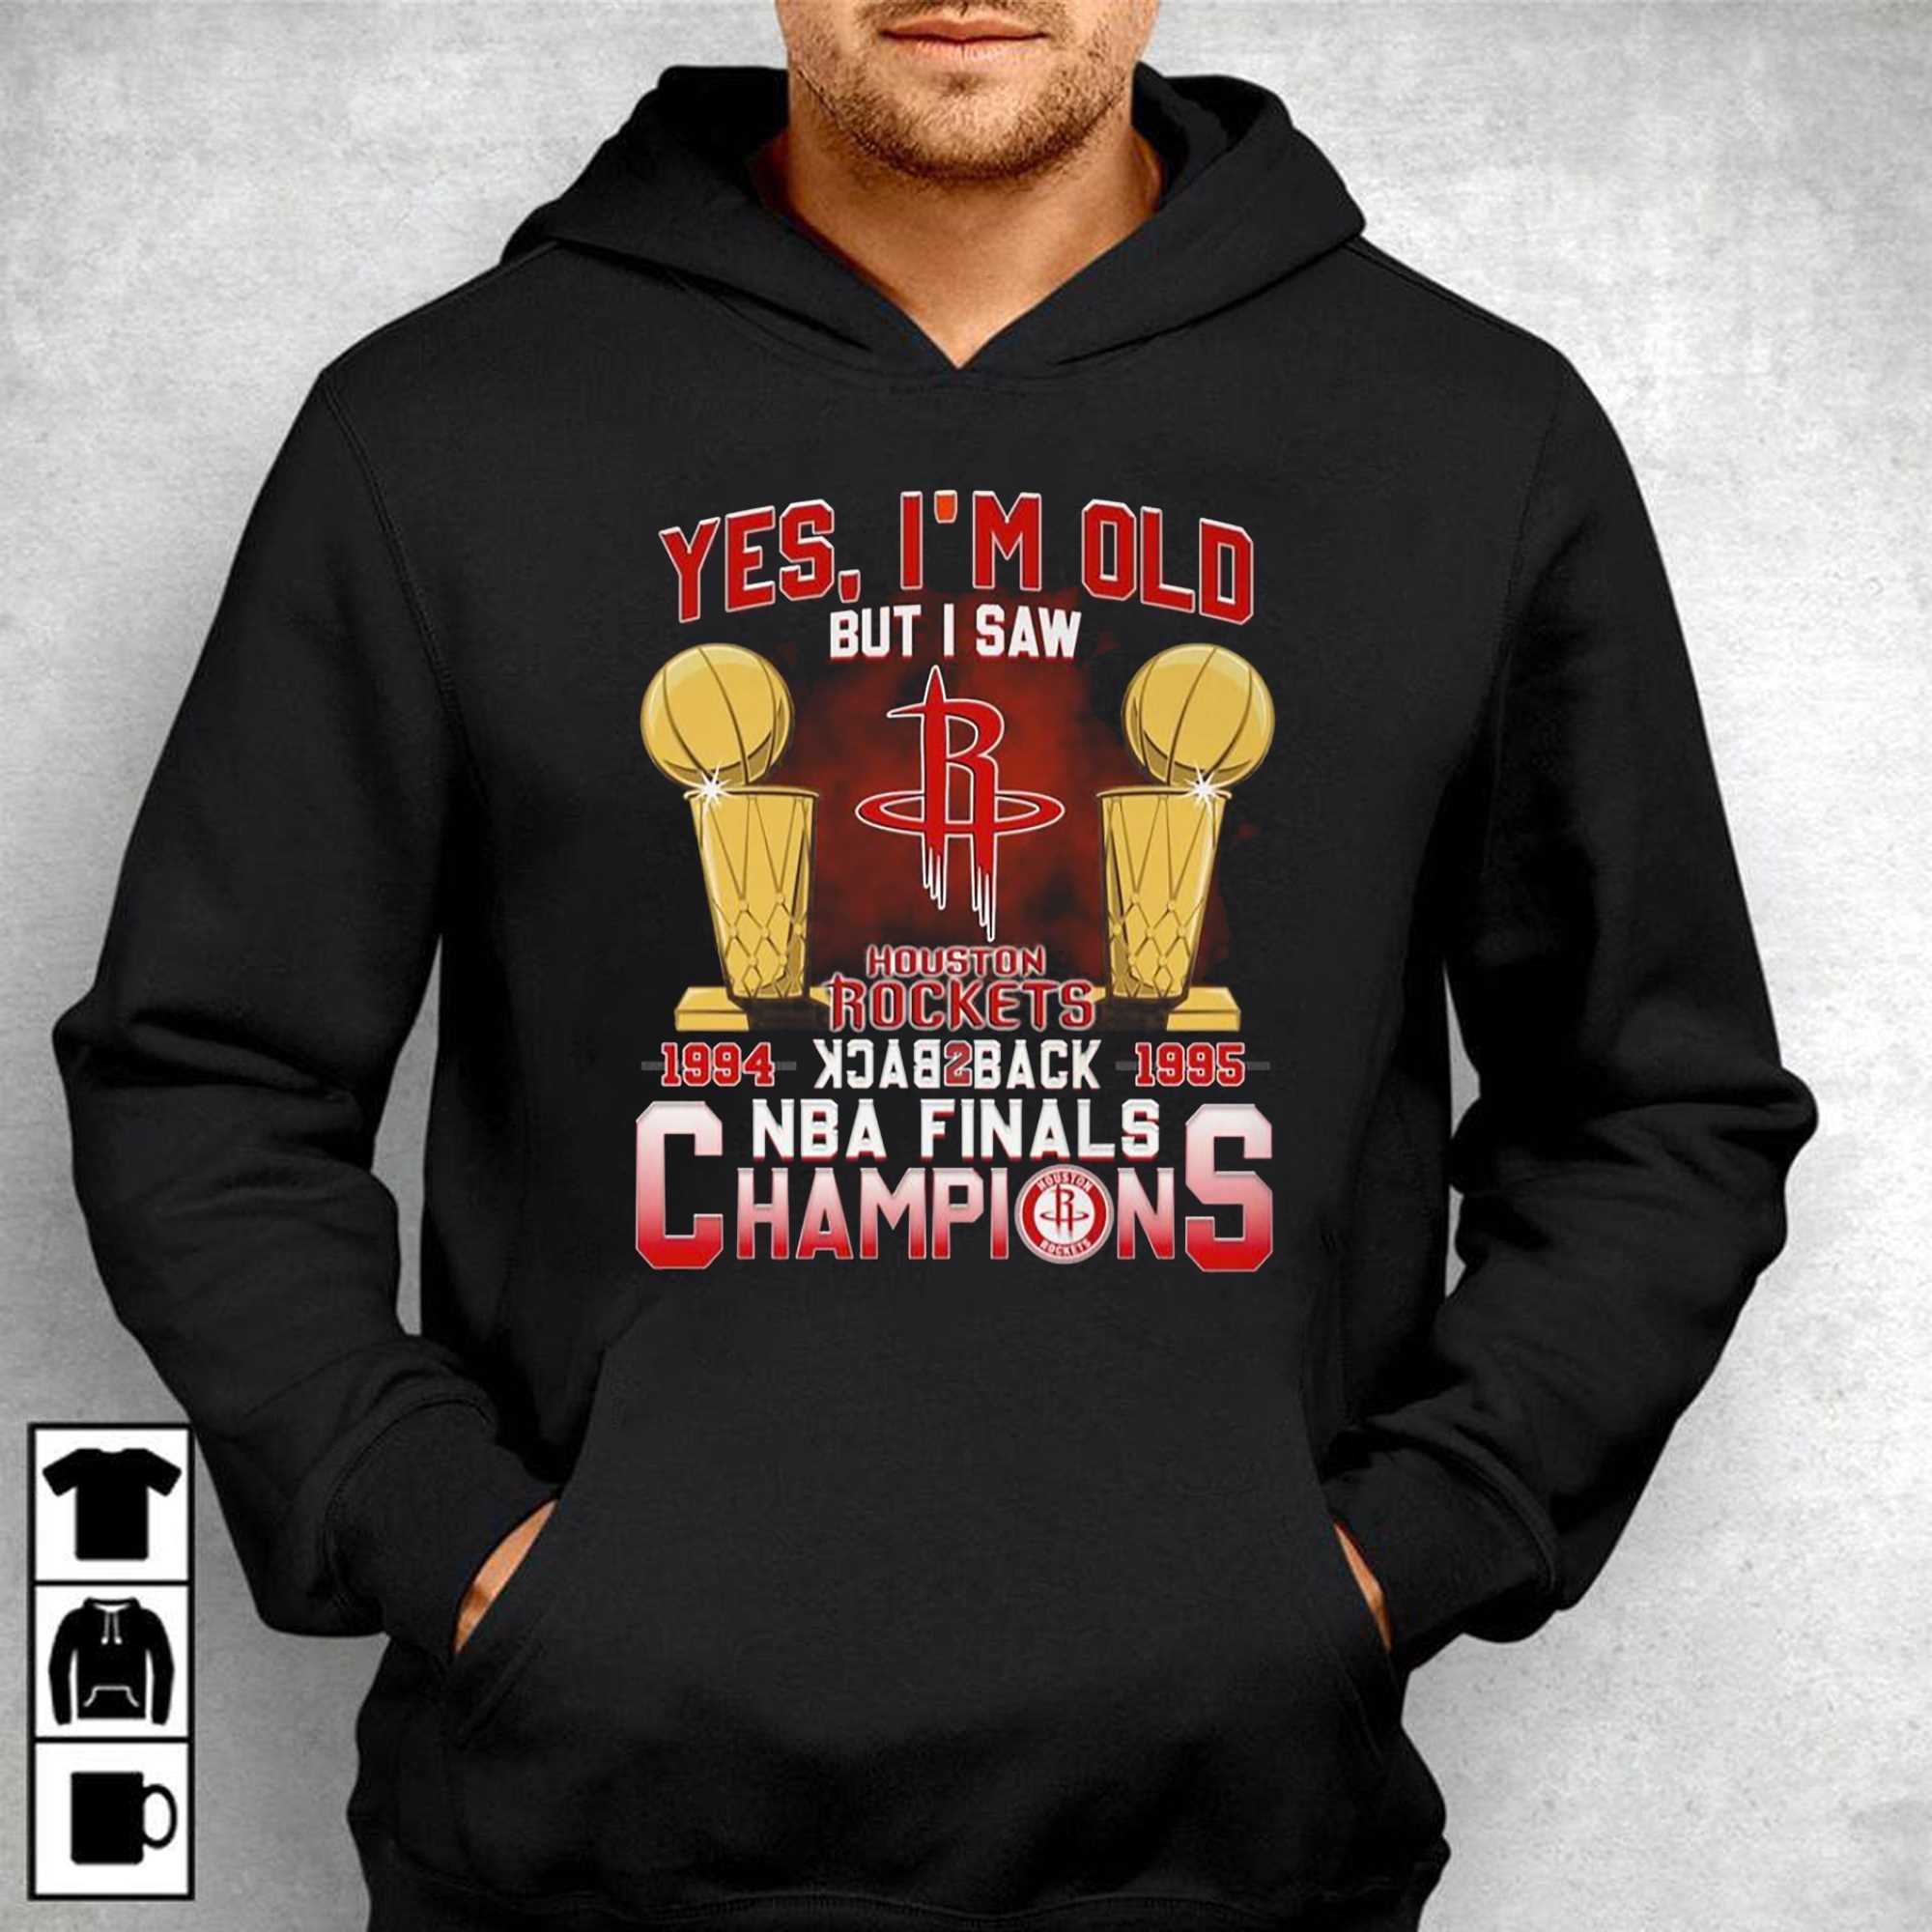 Official yes I'm old but I saw houston rockets back to back NBA finals  champions shirt, hoodie, sweatshirt for men and women